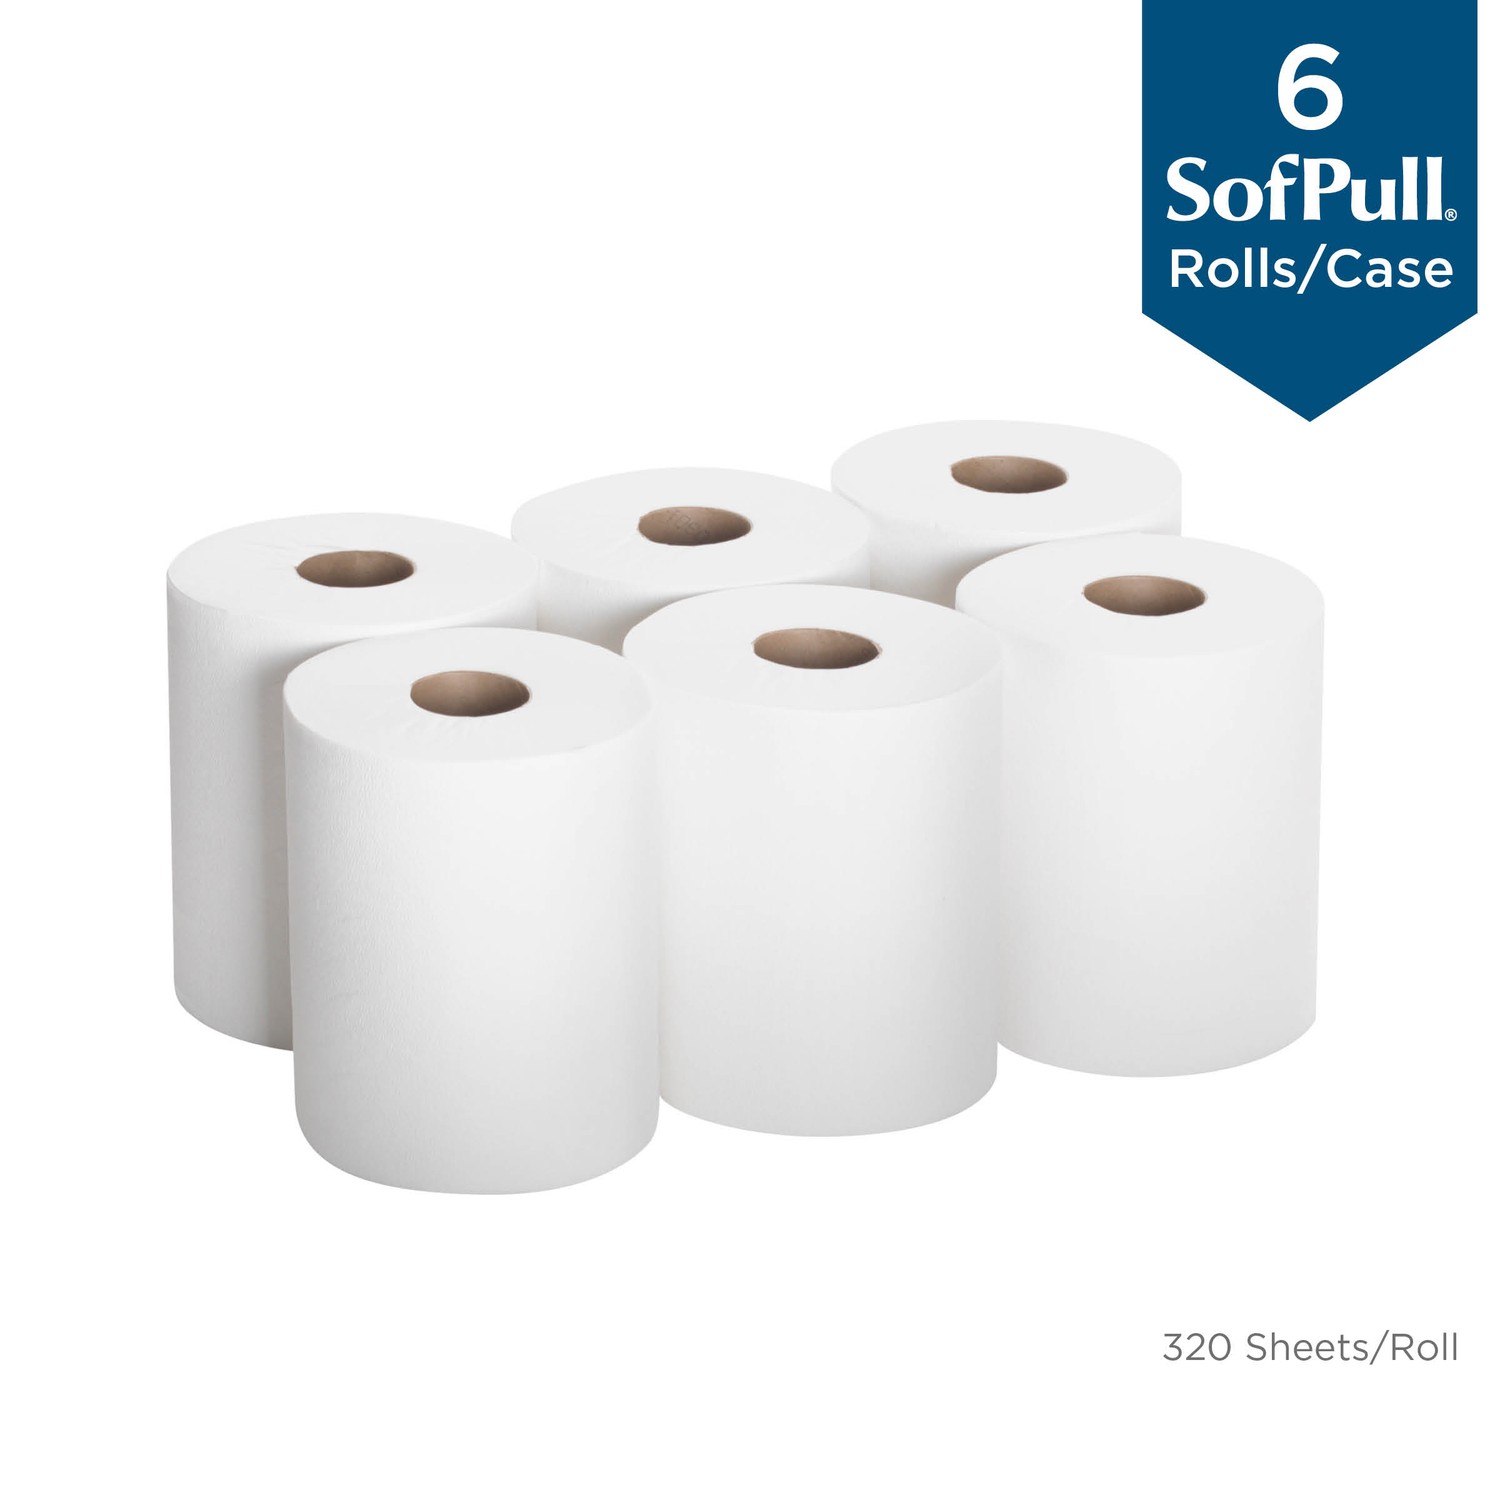 SofPull Centerpull Regular Capacity Paper Towels - 1 Ply - 15" x 7.80" - 320 Sheets/Roll - White - Soft, Absorbent - For Washroo